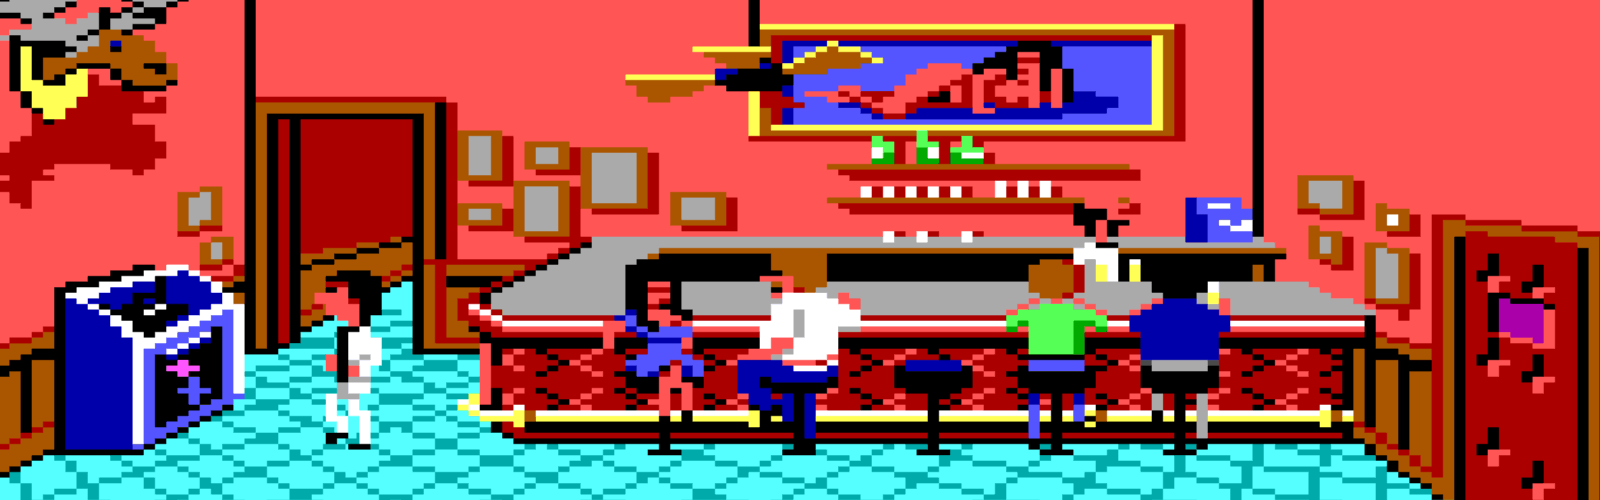 Screenshots from Leisure Suit Larry in the Land of the Lounge Lizards